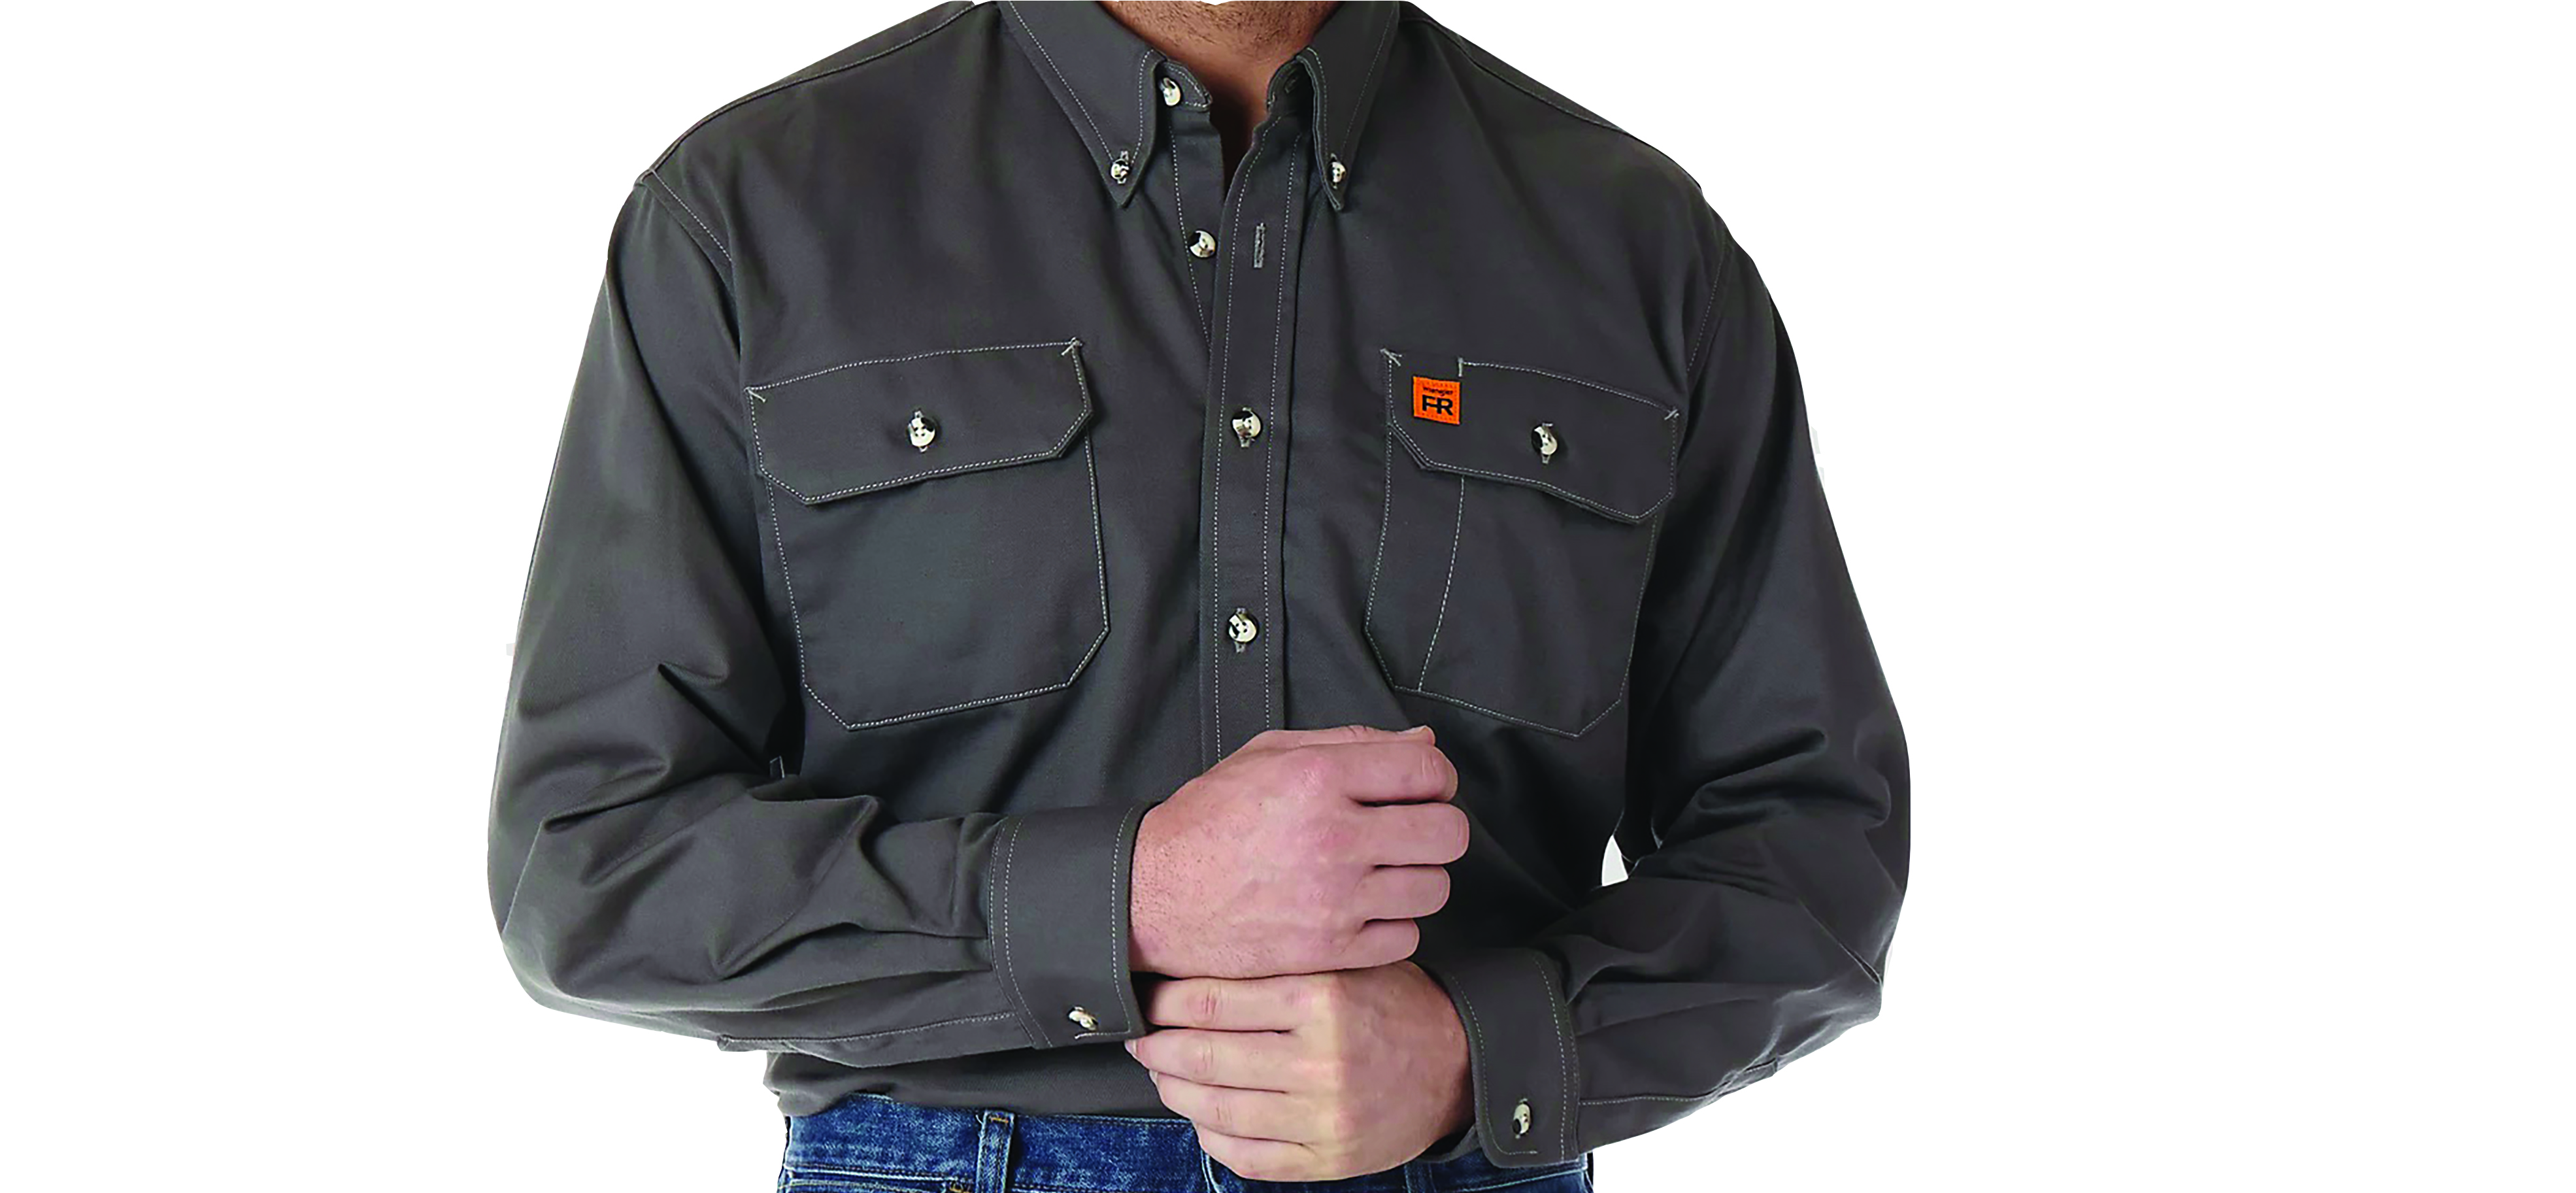 A person wearing a brown long-sleeved button-up shirt with jeans. Image by Wrangler.